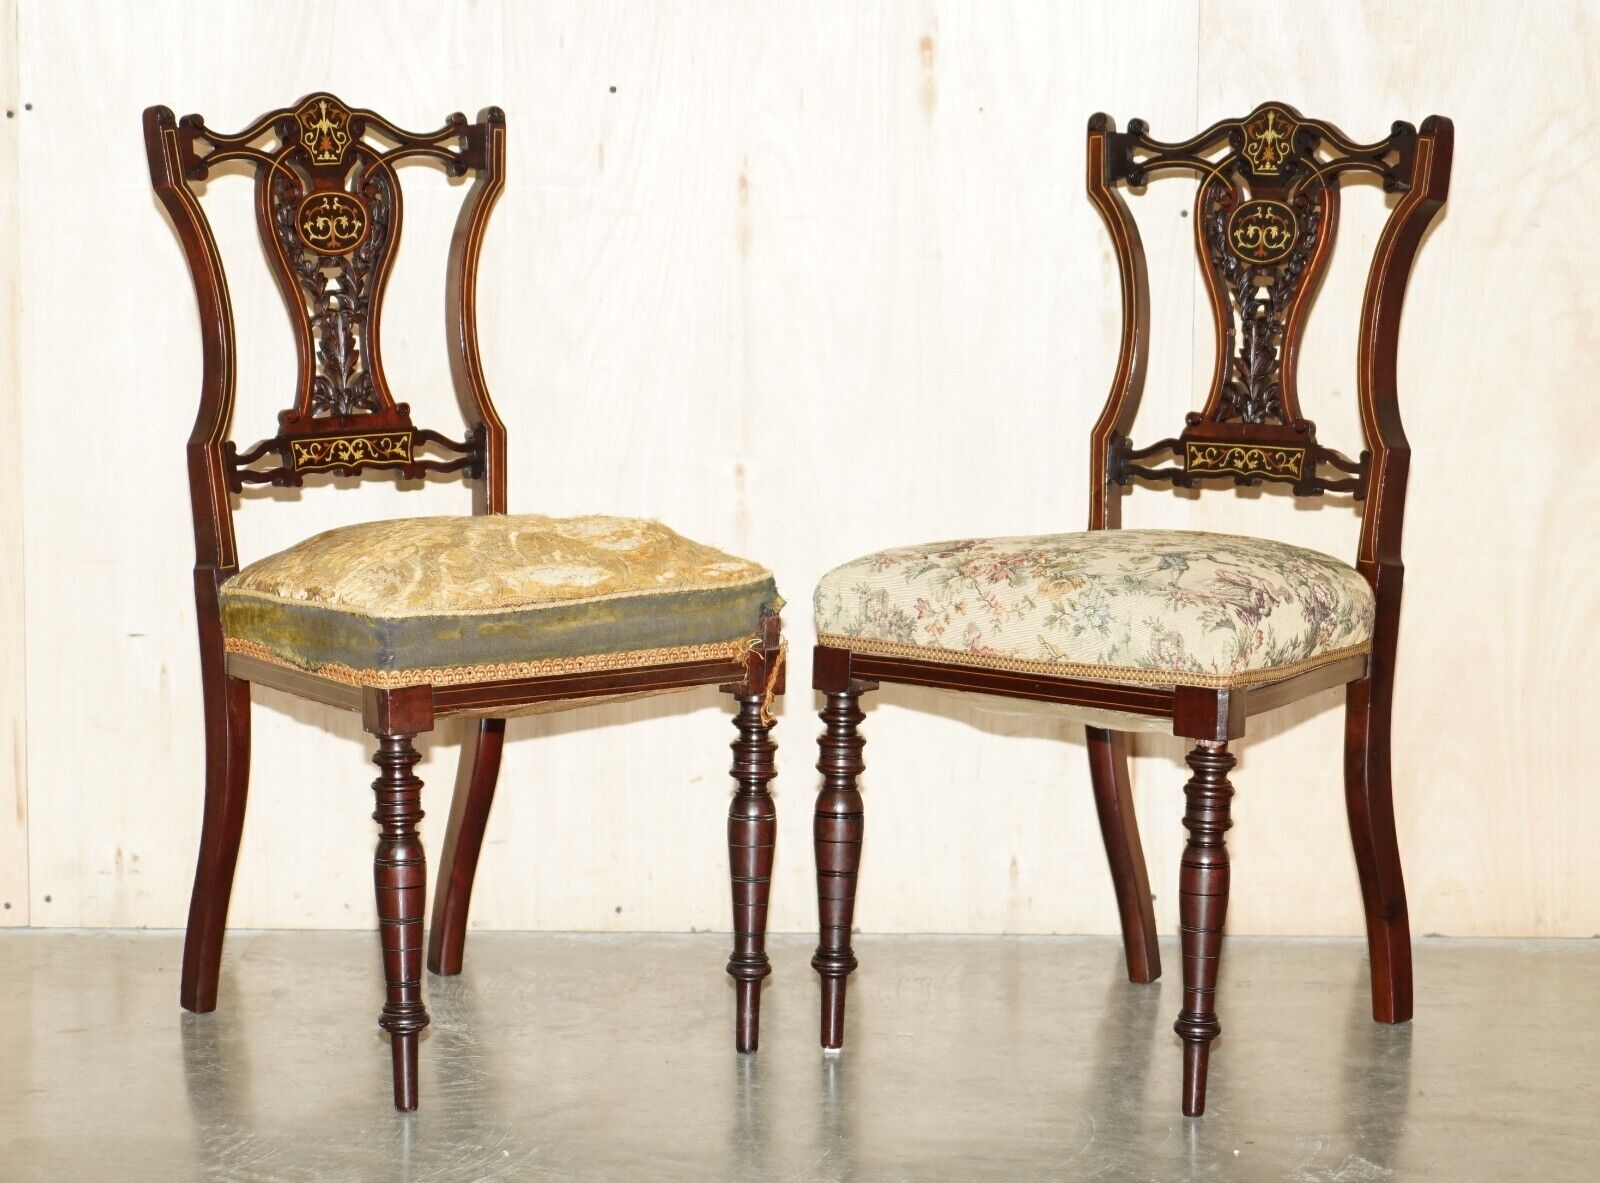 PAIR OF ANTIQUE VICTORIAN ROSEWOOD SALON CHAIRS WITH STUNNING INLAID BACK PANELS